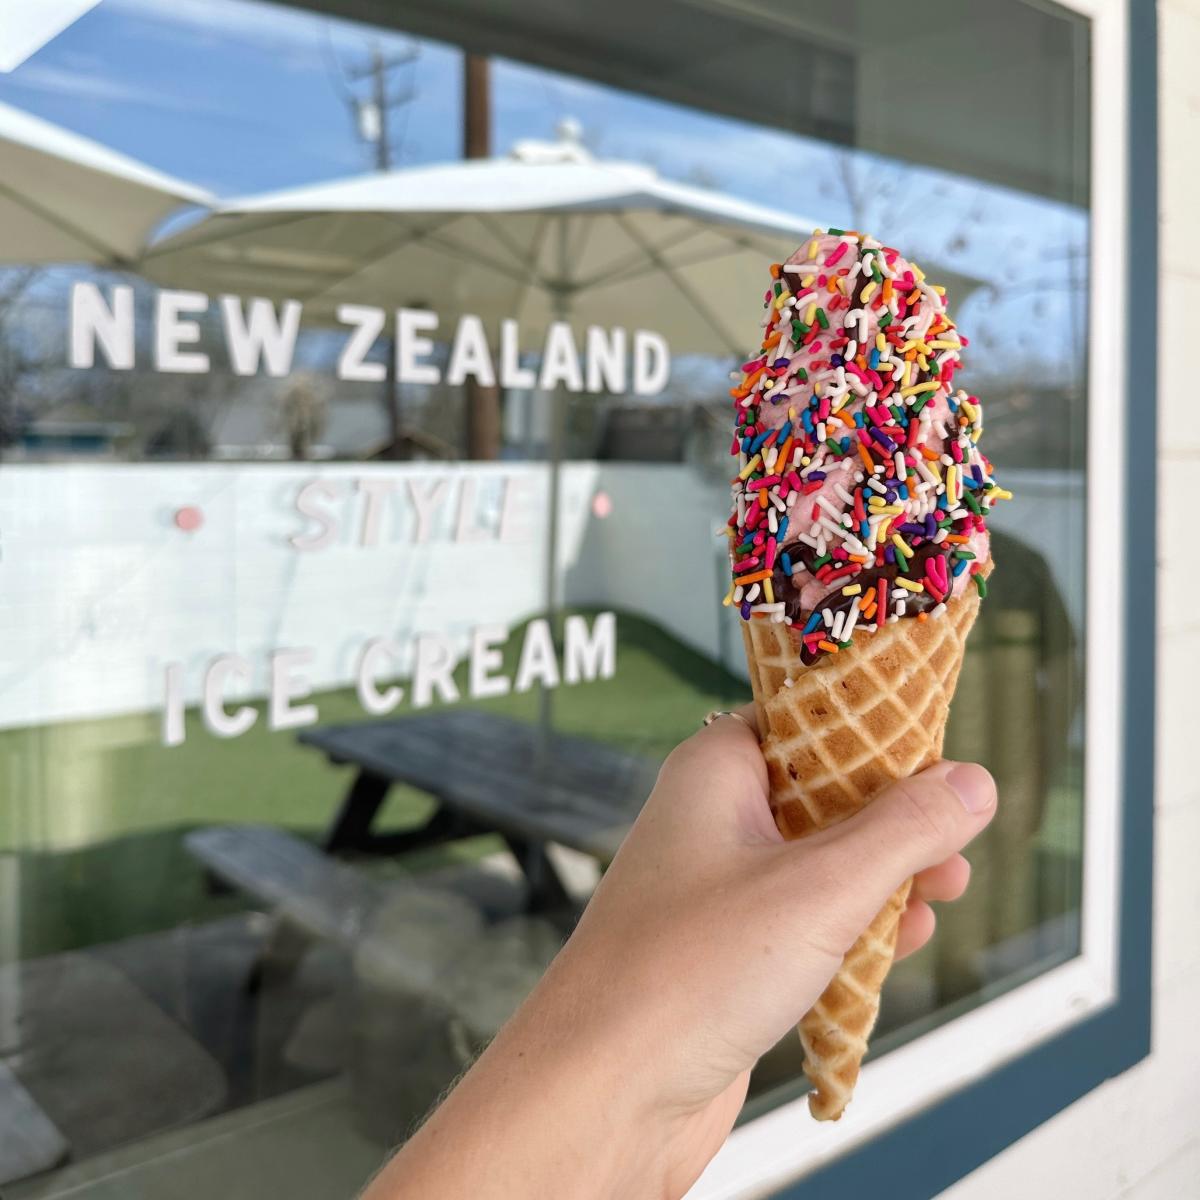 Image of a hand holding a ice cream cone with sprinkles out front of Zed's Ice Cream.